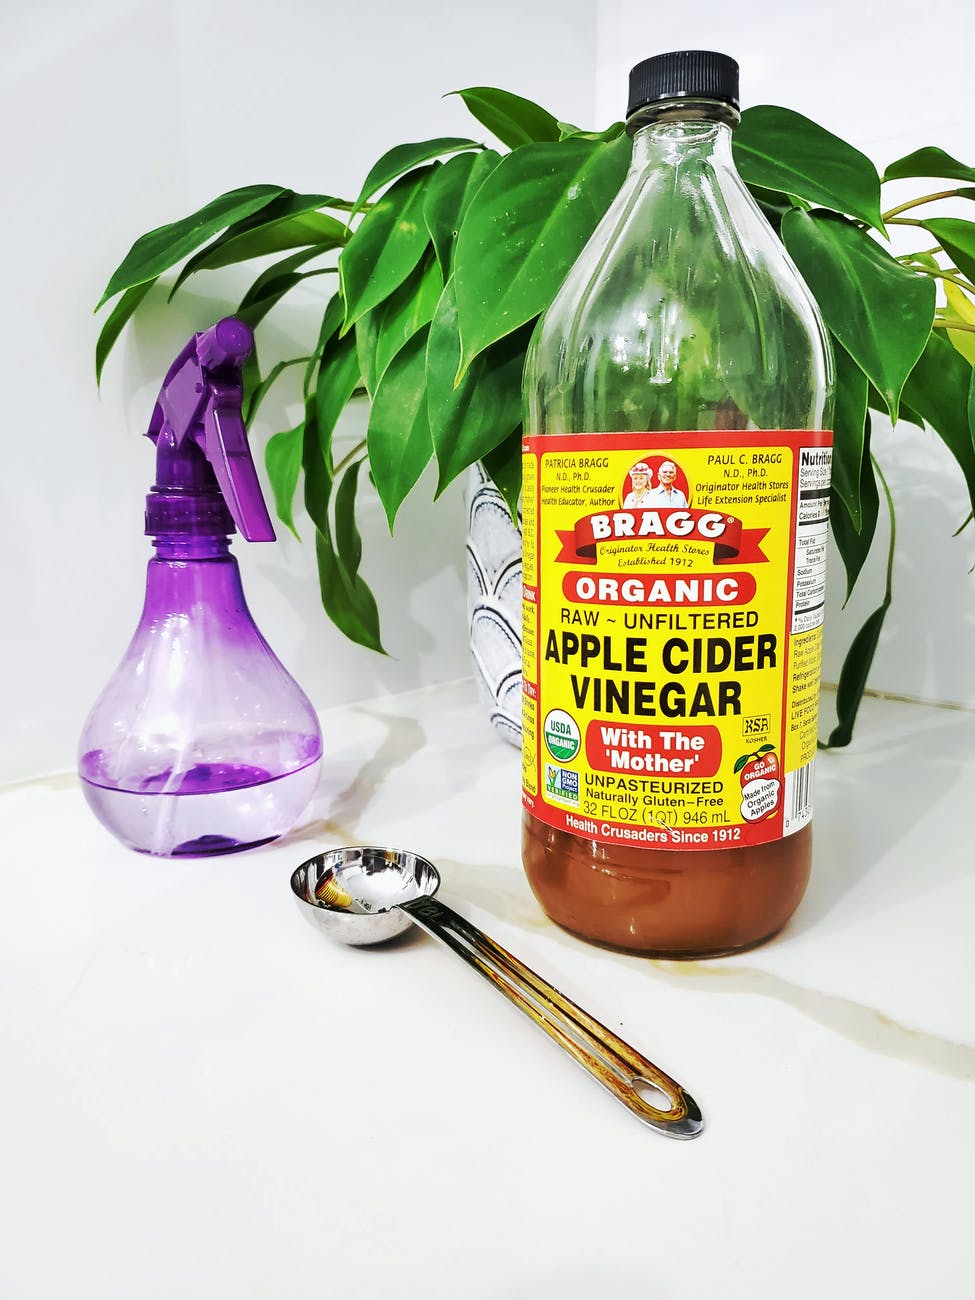 Is It Safe And Effective To Use Vinegar For Cleaning This Is What You Should Know